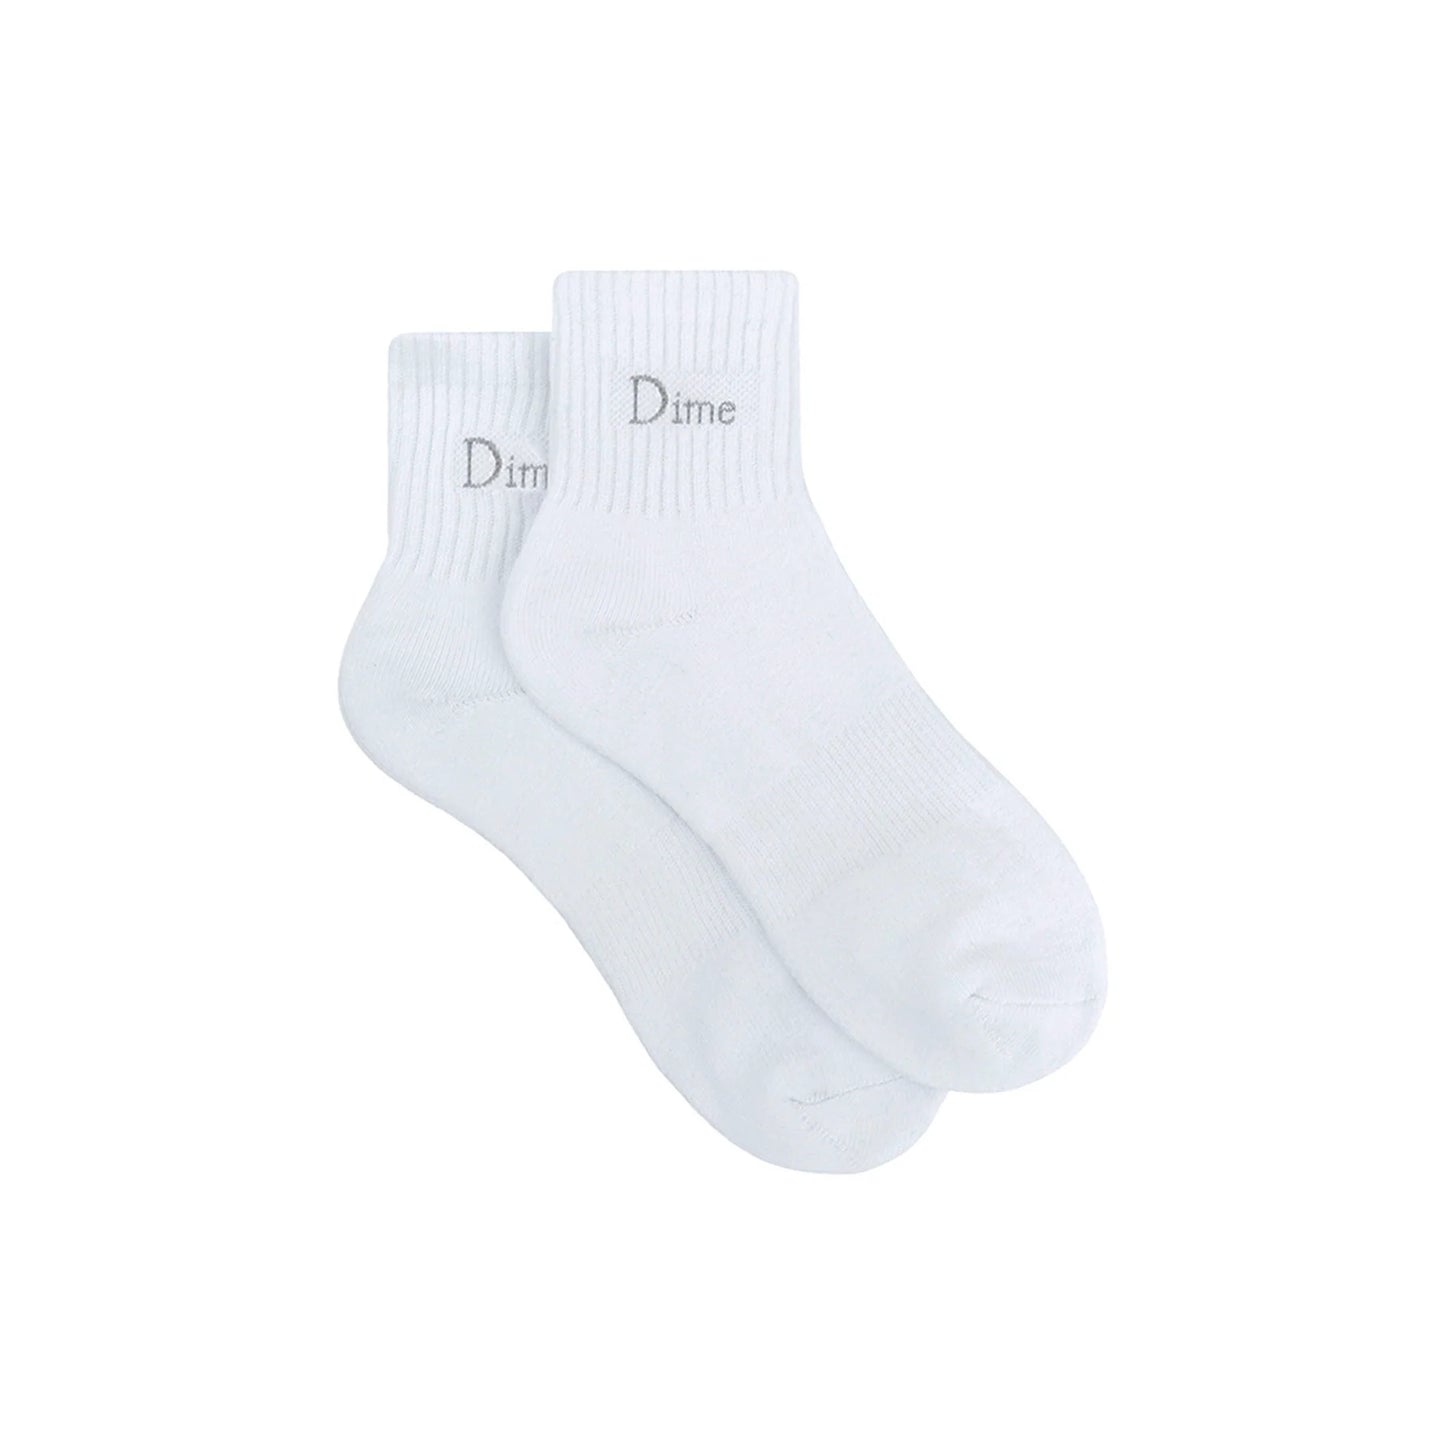 Dime Classic Socks OS (color options listed)